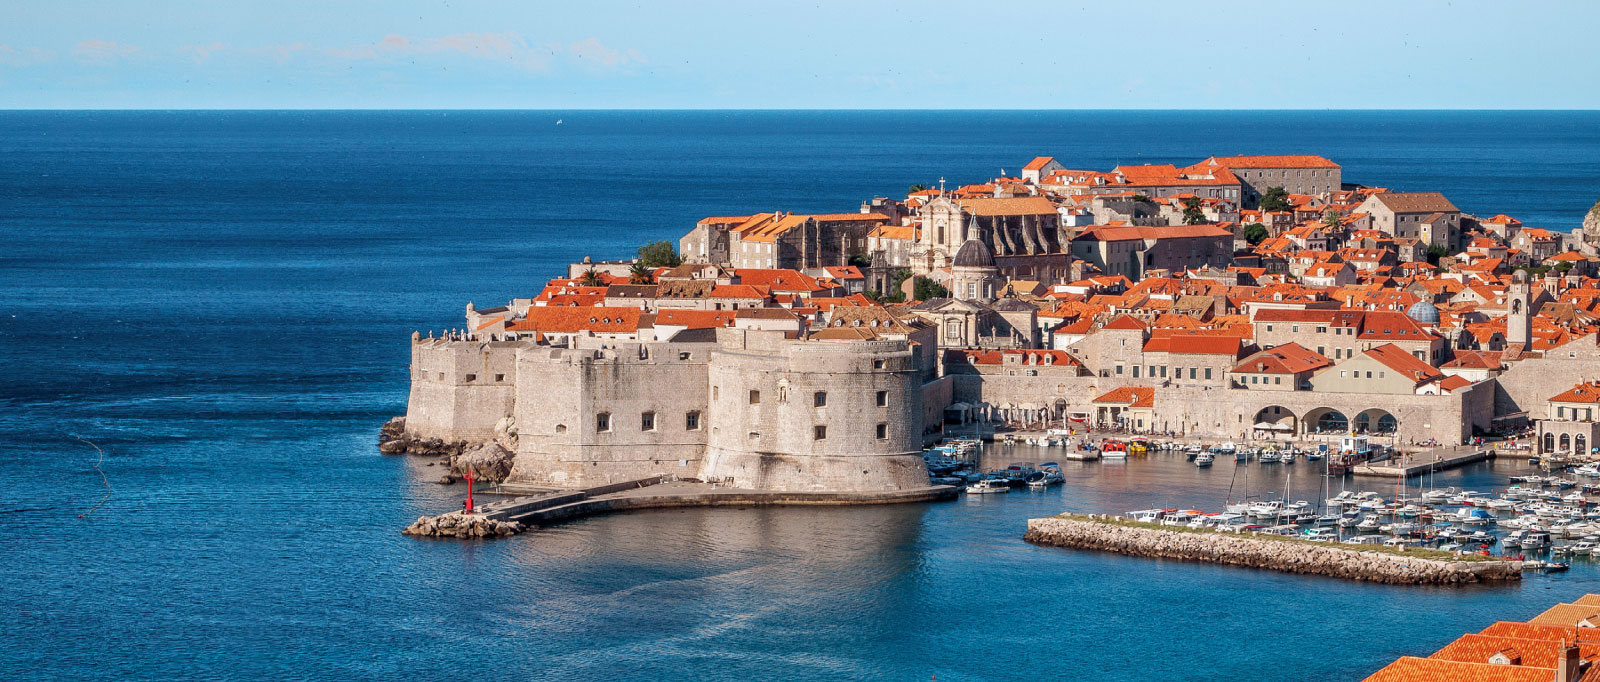 accomoodation-in-dubrovnik-featured-image-3-1